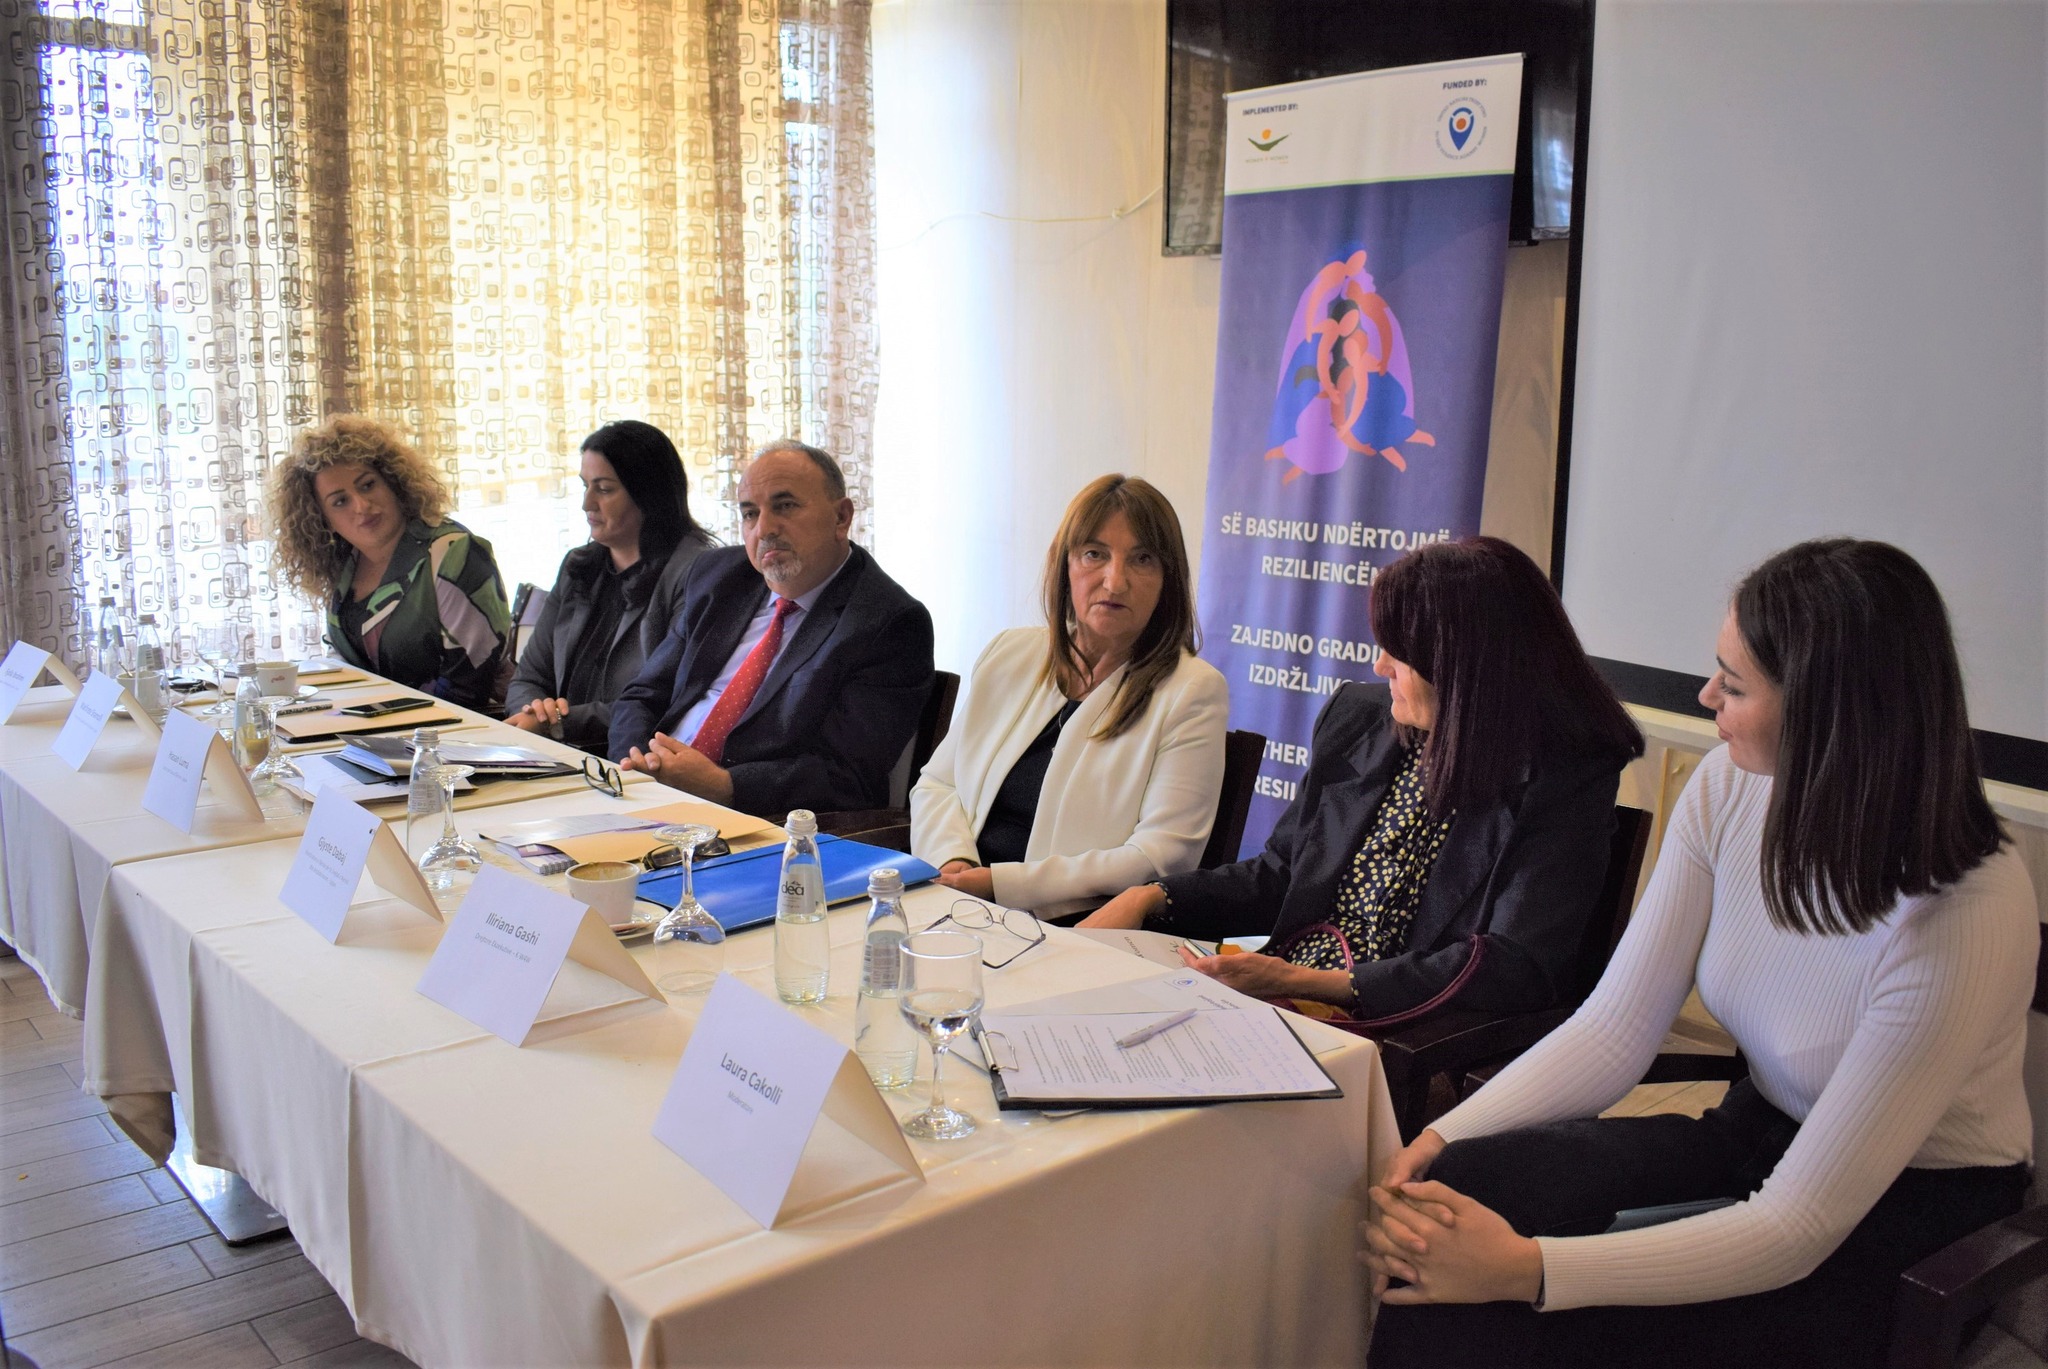 Informative discussion on the existing mechanisms against gender-based violence with women from the municipality of Lipjan